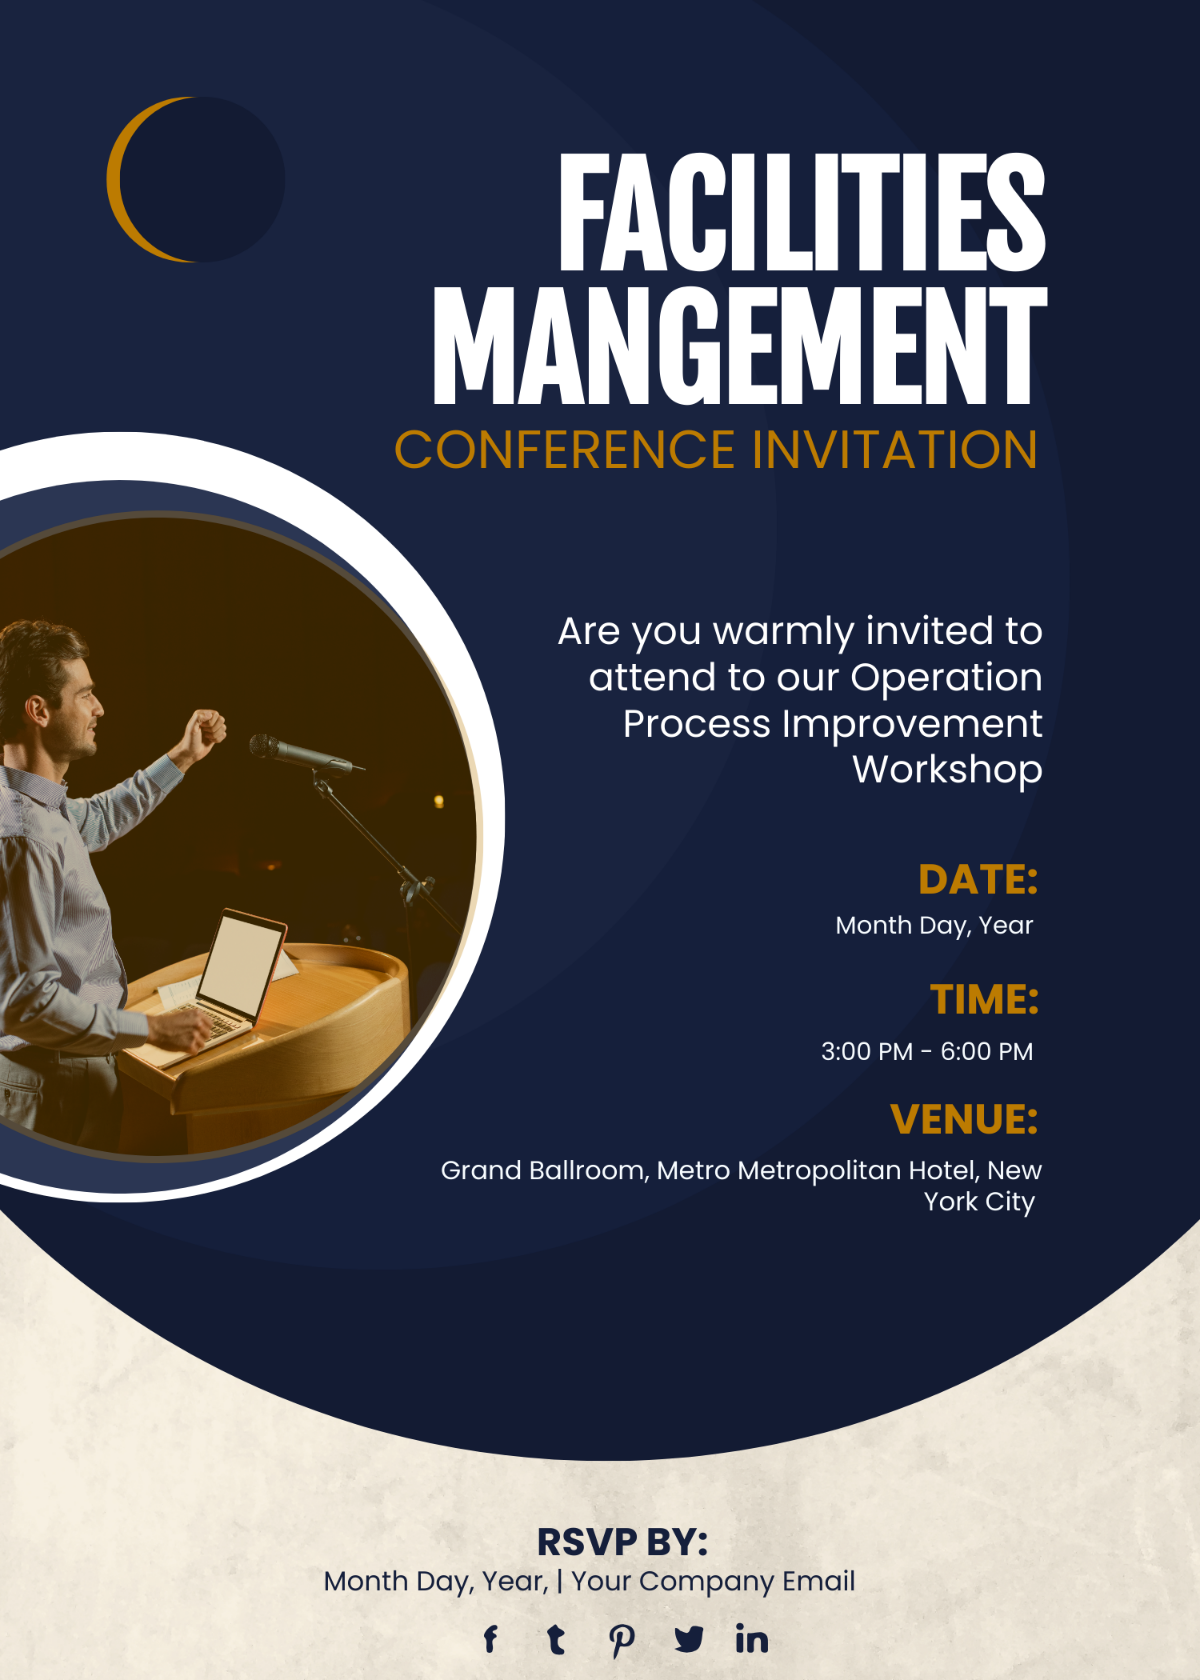 Facilities Management Conference Invitation Card Template